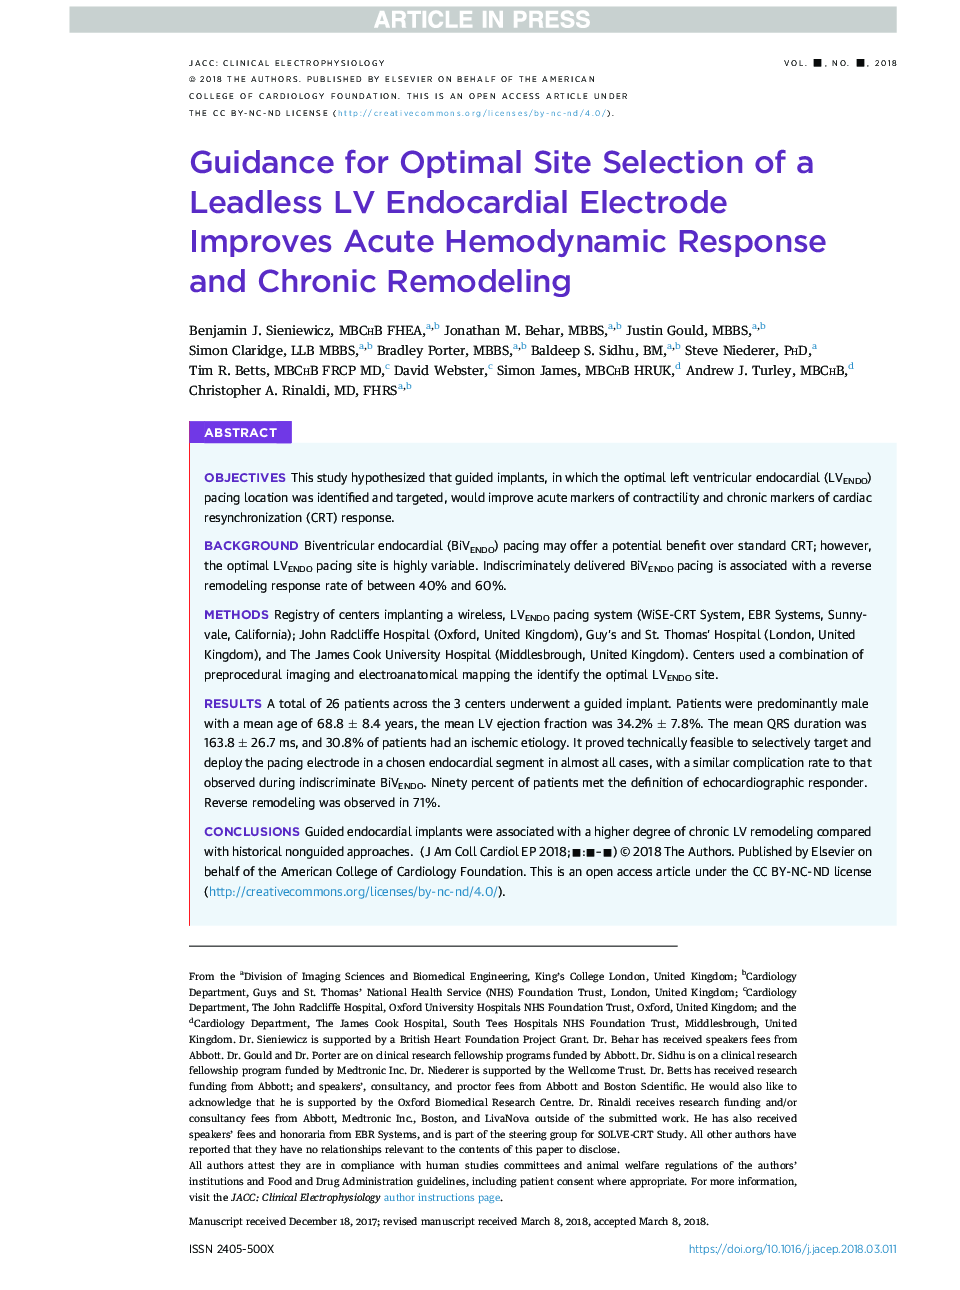 Guidance for Optimal Site Selection of a Leadless Left Ventricular Endocardial Electrode Improves Acute Hemodynamic Response and Chronic Remodeling